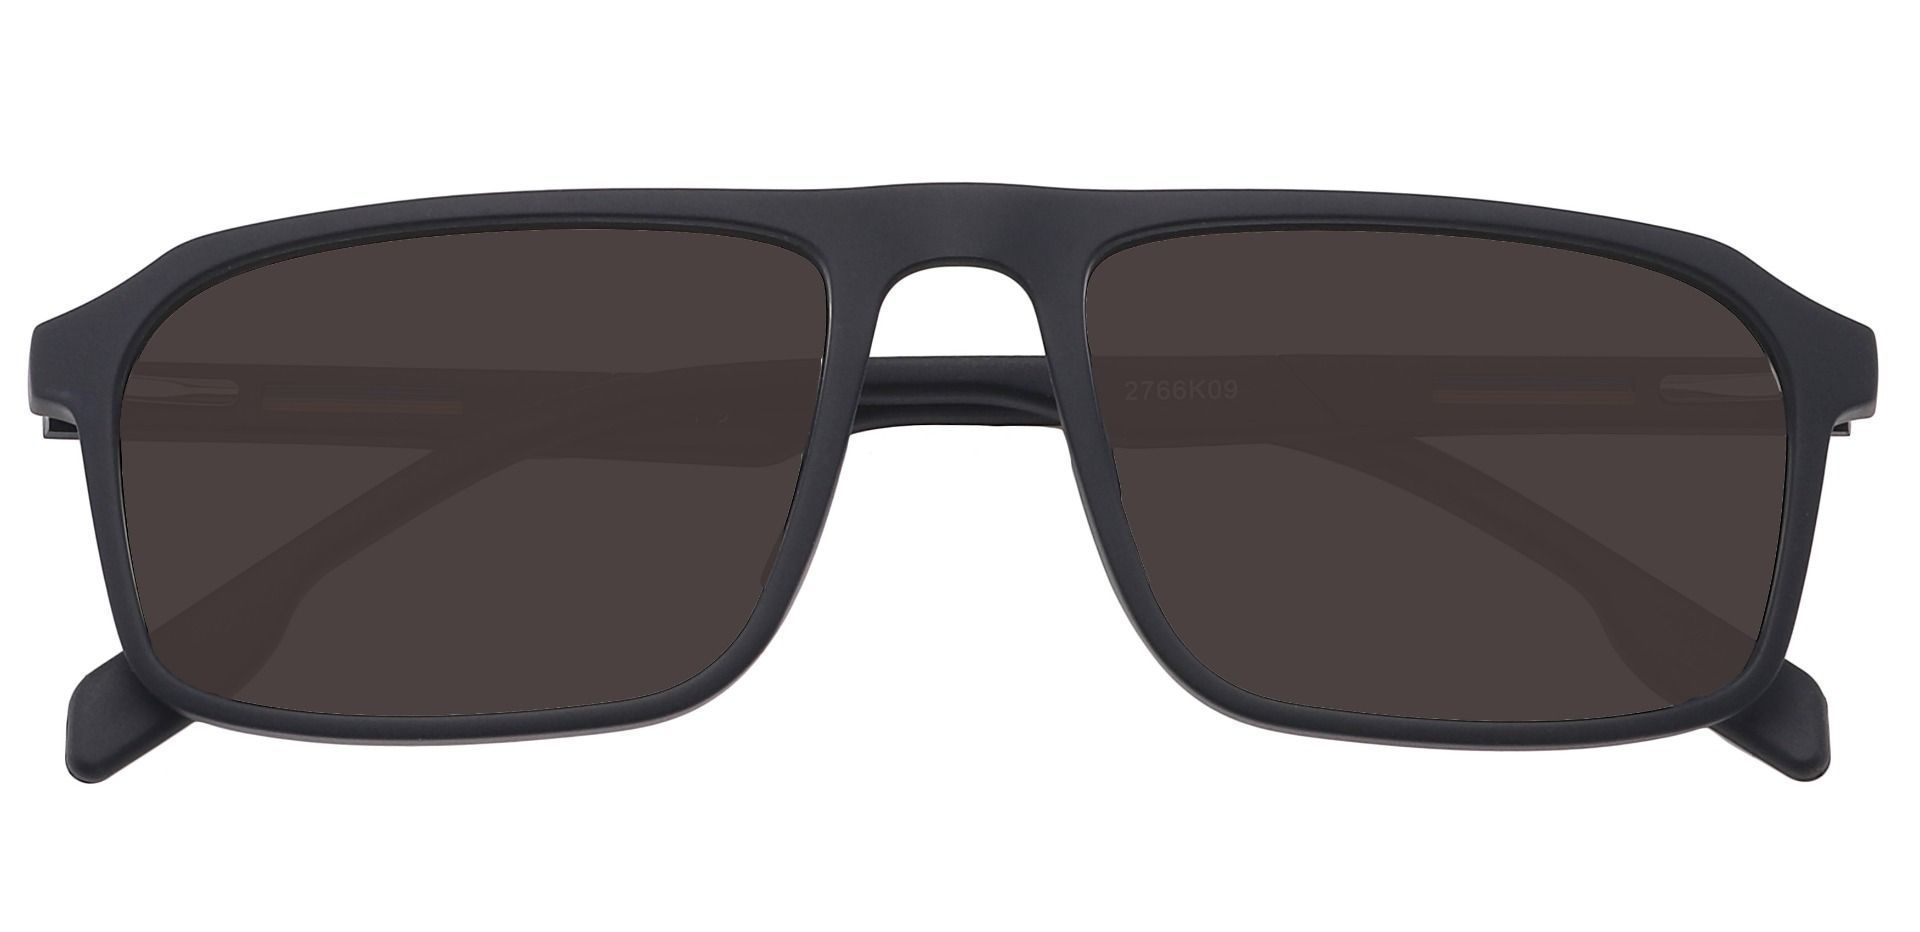 Hector Rectangle Lined Bifocal Sunglasses - Black Frame With Gray Lenses